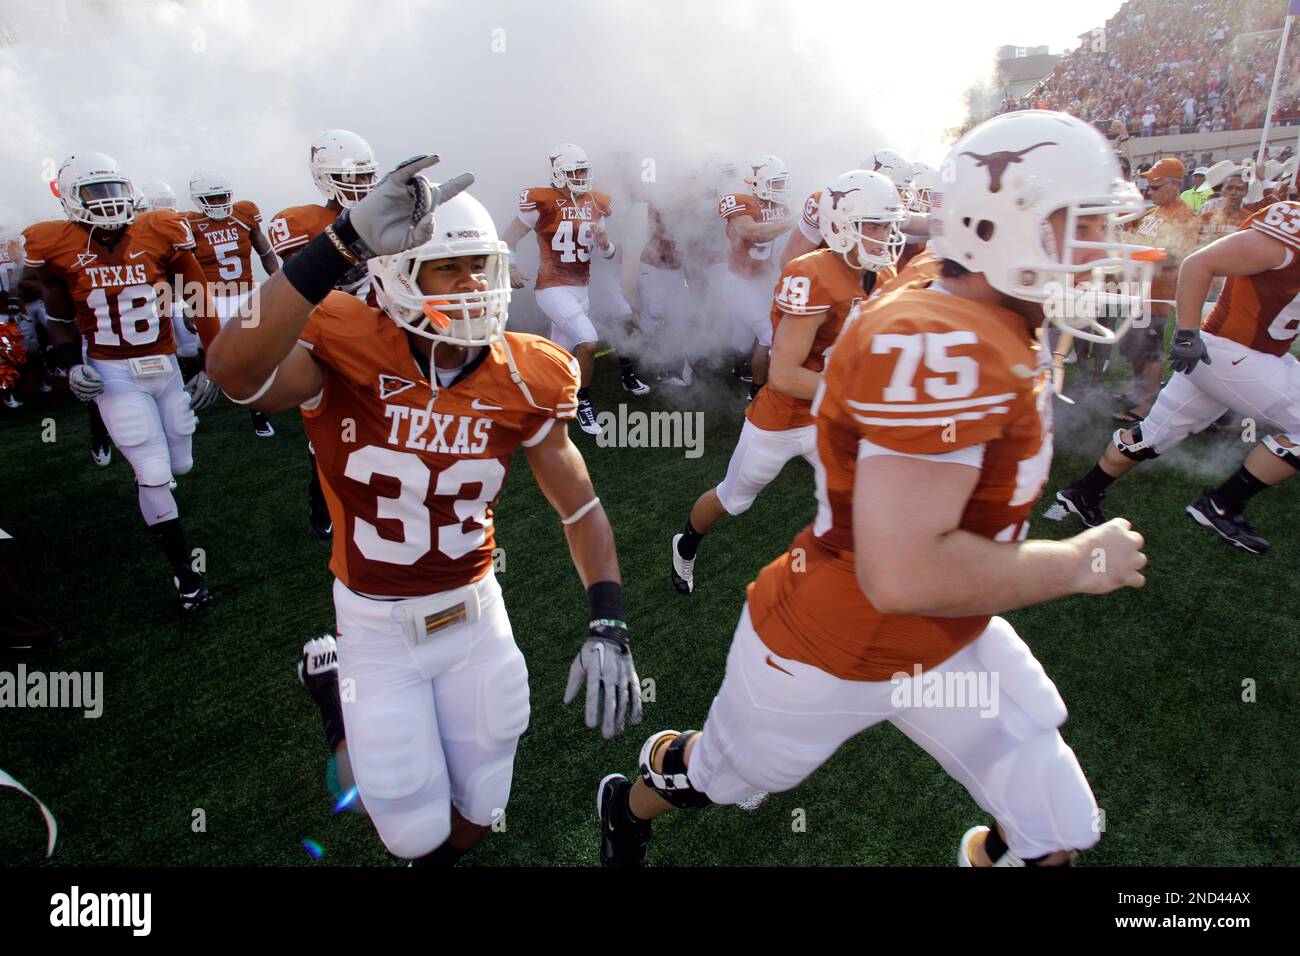 Texas' Jordan Hicks (33) and Steve Moore (75) take the field with